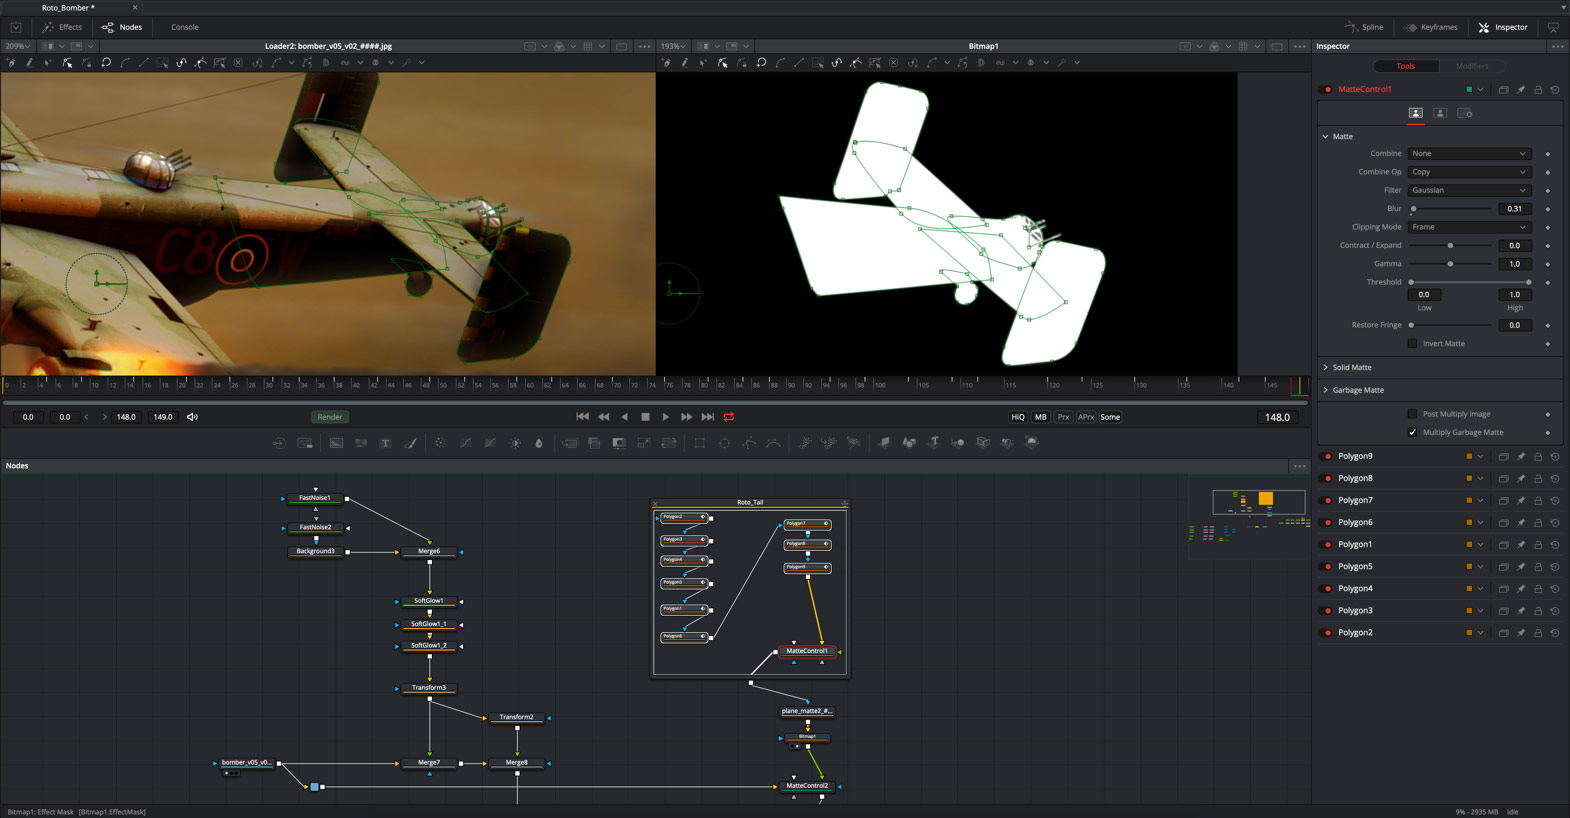 blackmagic fusion after effects